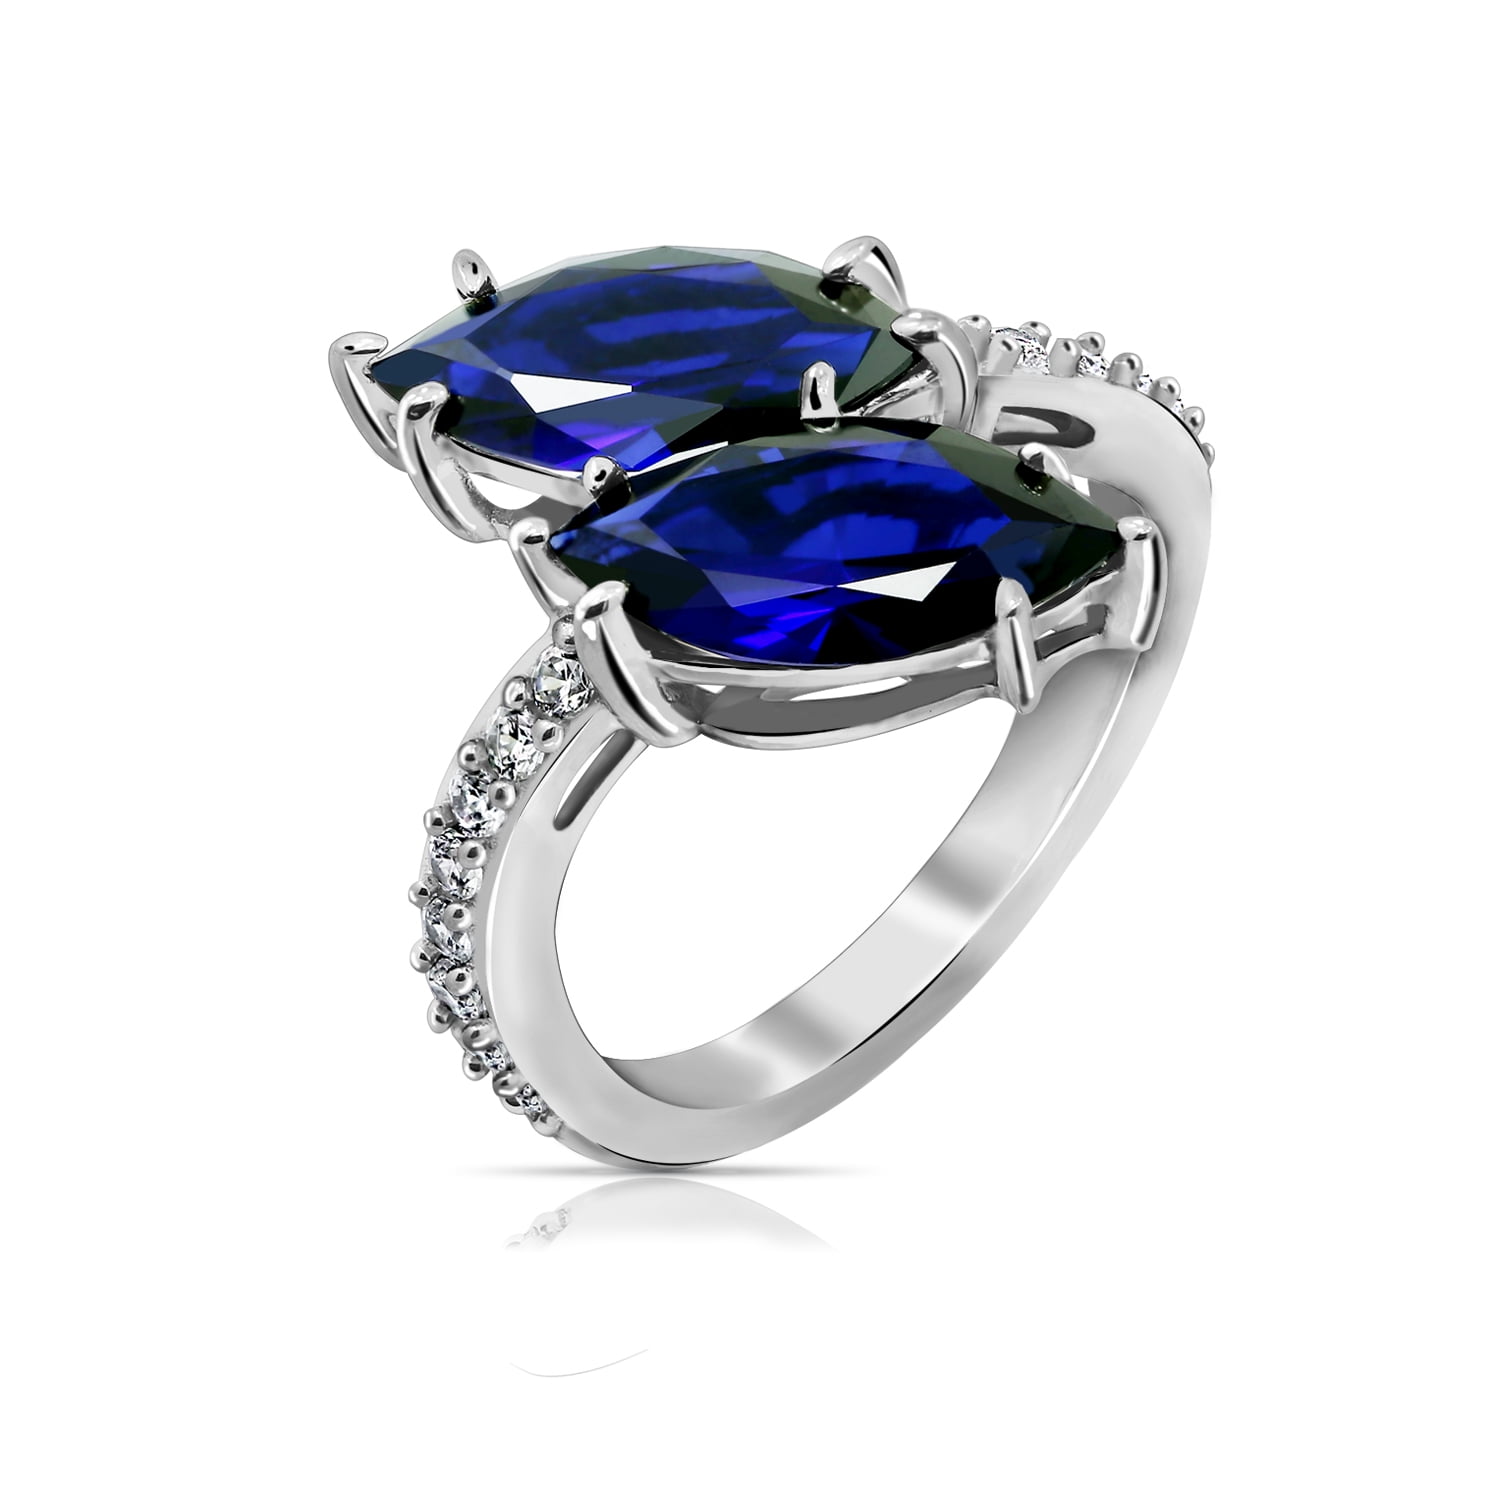 Details about   10k White Gold Marquise Sapphire And Diamond Ring 